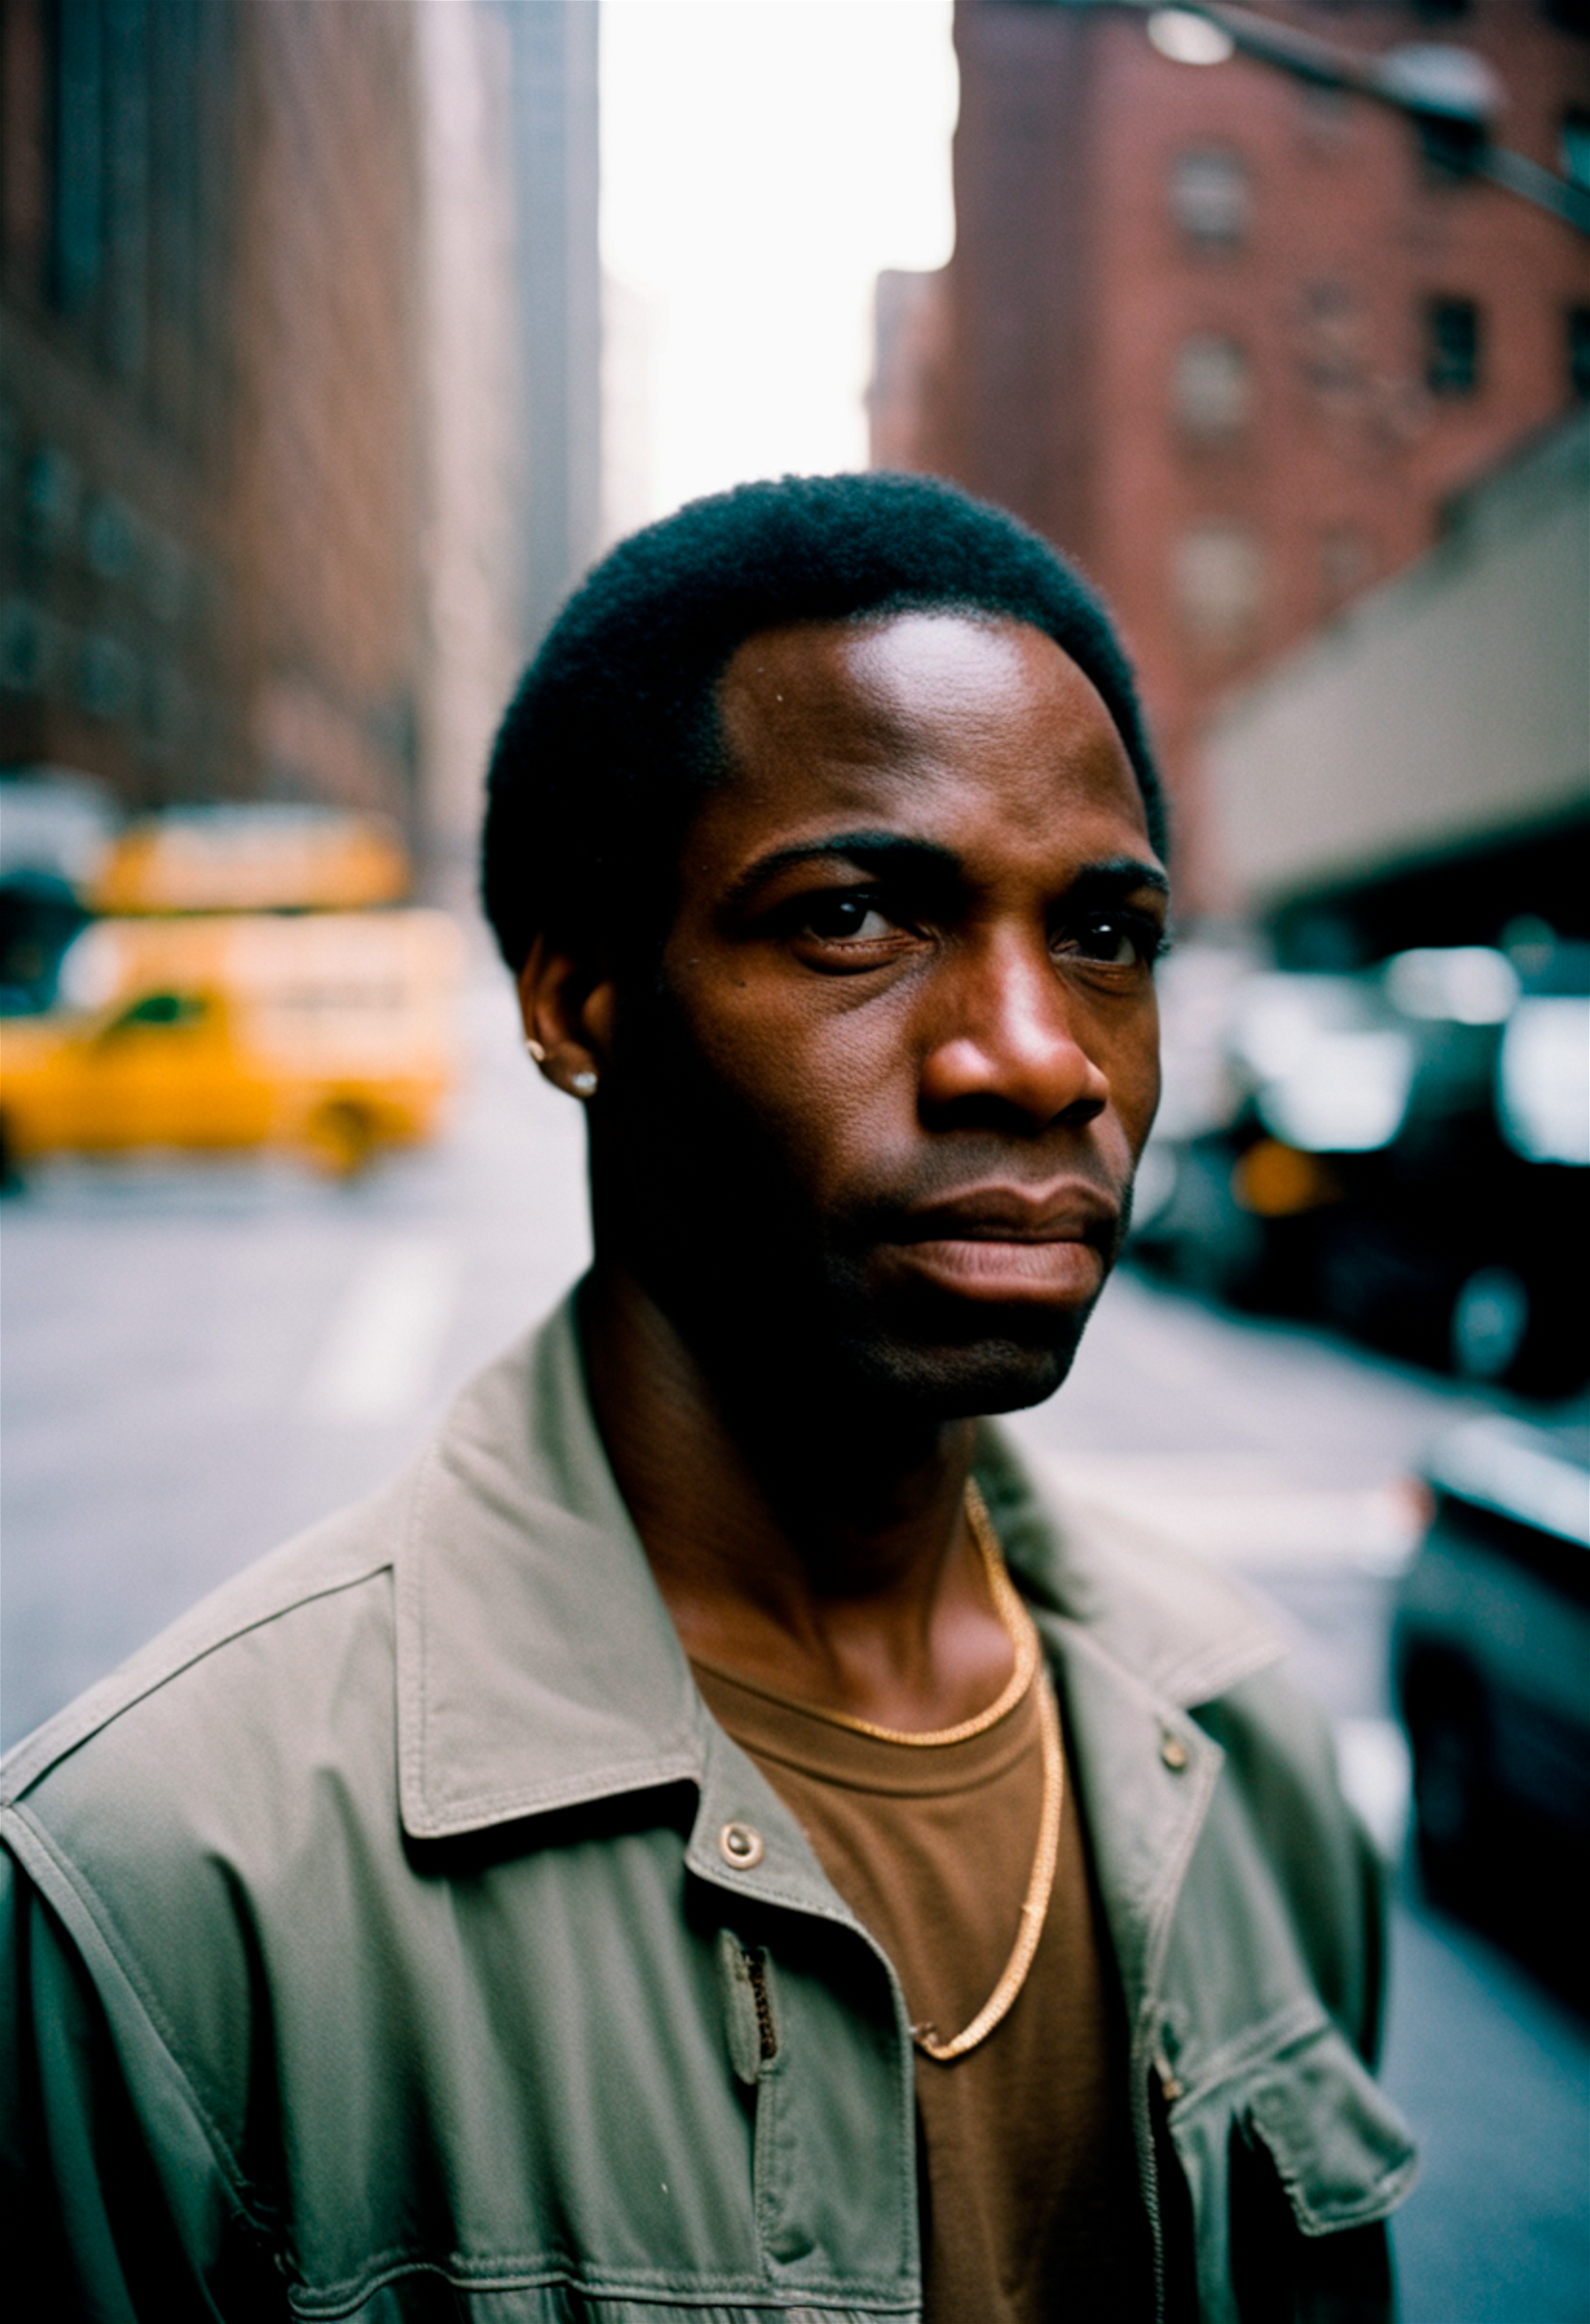 Photo of a an african-american man in new york, head and shoulders portrait shot with Fujifilm Superia, candid street photography